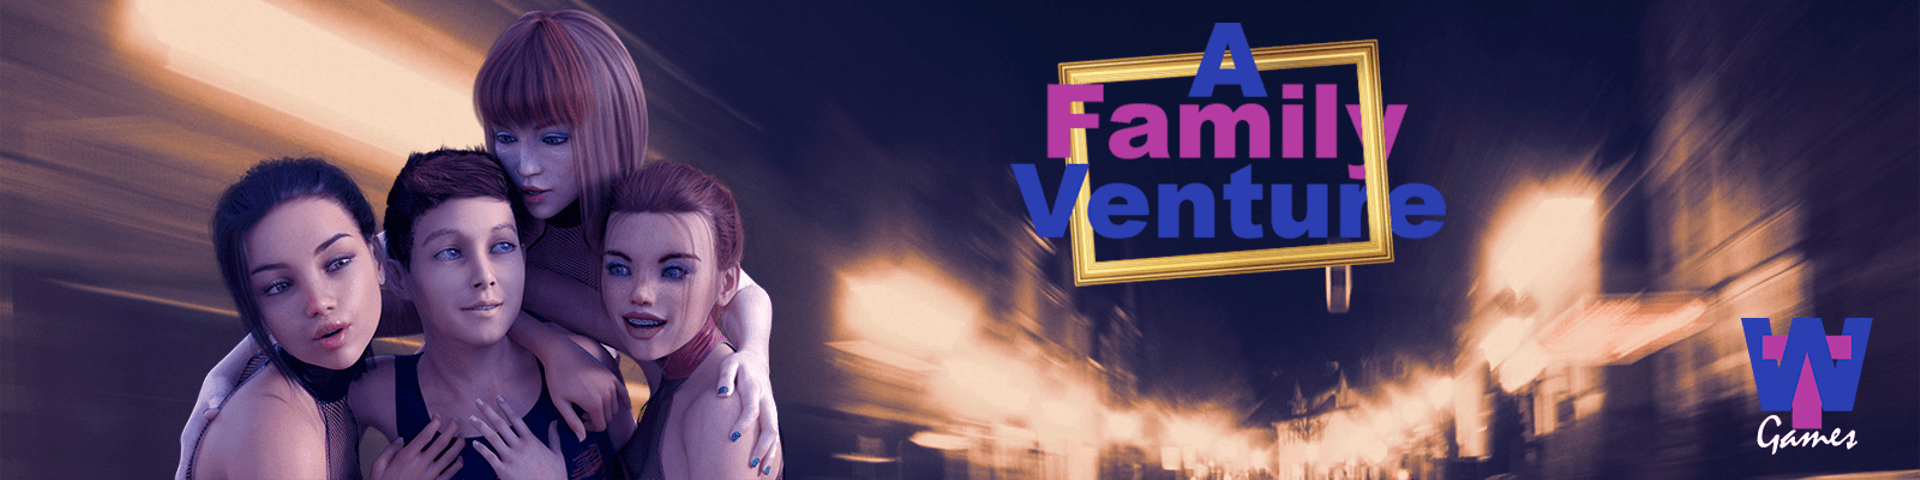 A Family Venture – Version 0.05b - Patreon incest adult game 5